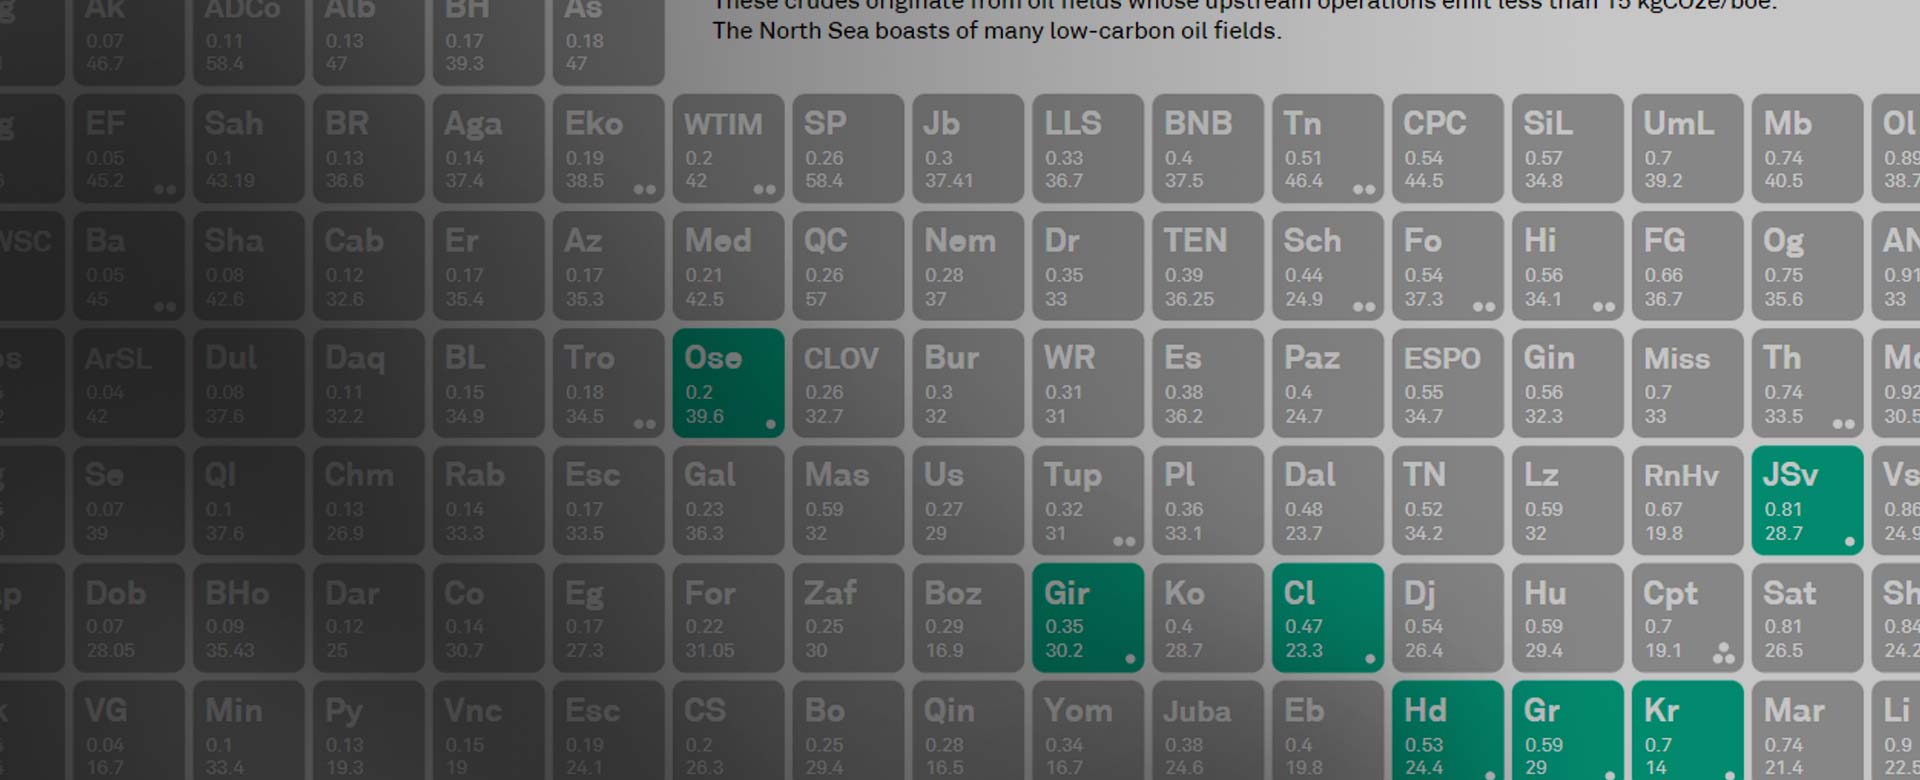 Interactive: Platts Periodic Table of Oil - 4th edition adds carbon intensity data